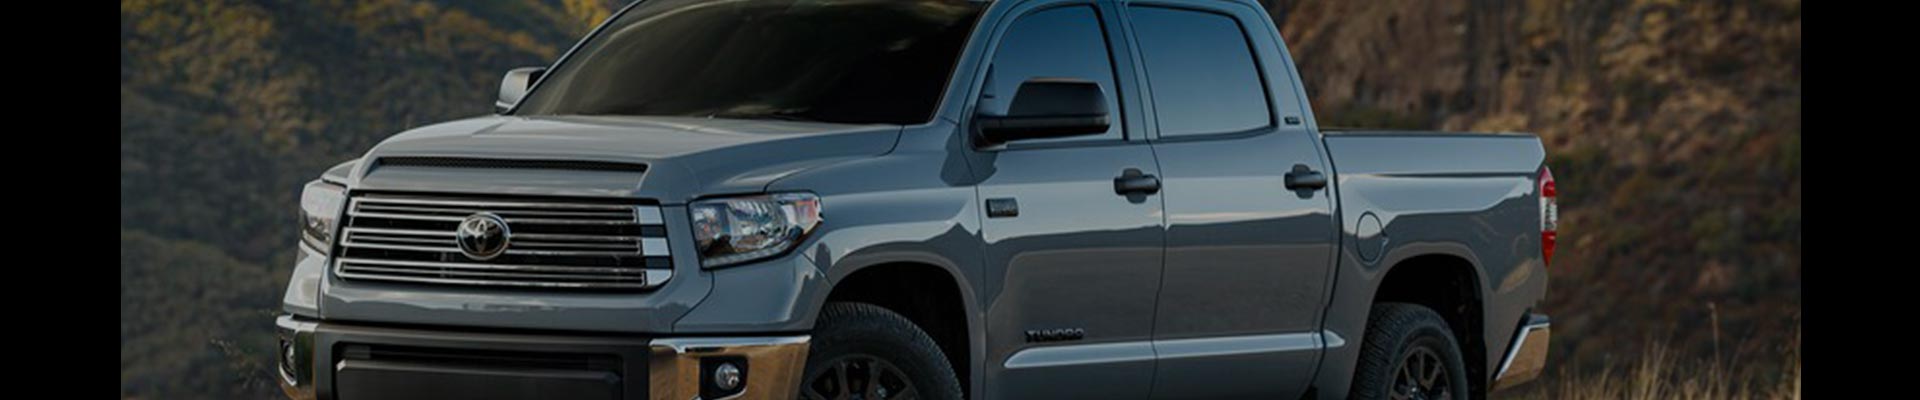 Shop Replacement and OEM 2011 Toyota Tundra Parts with Discounted Price on the Net